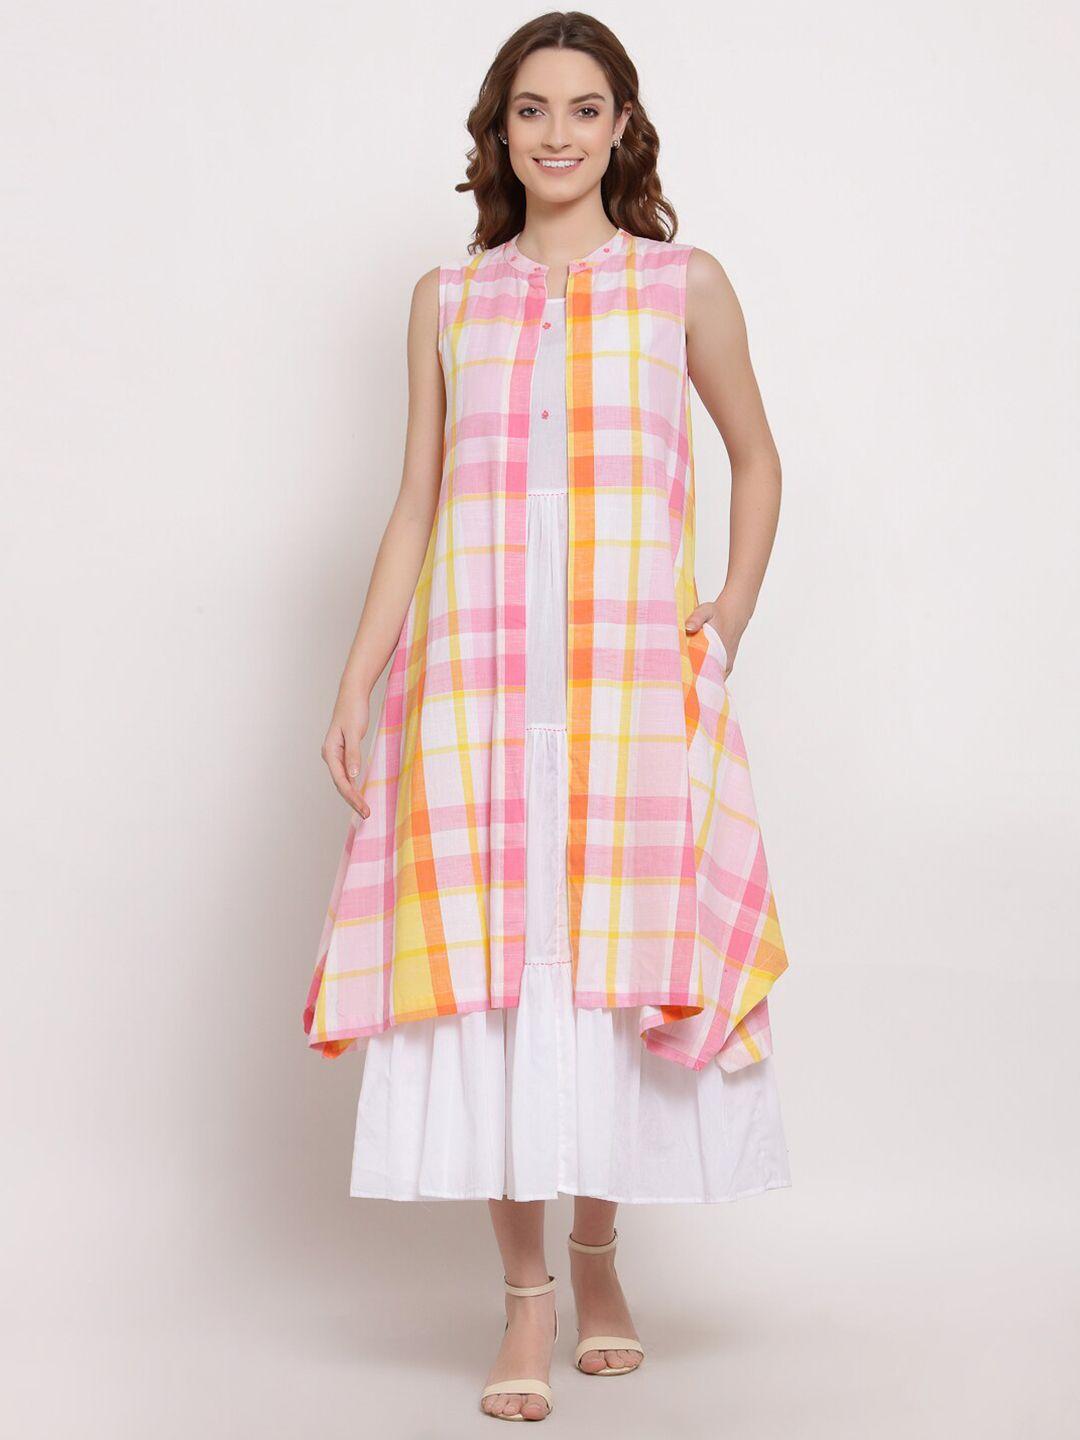 terquois-pink-&-white-checked-layered-a-line-midi-dress